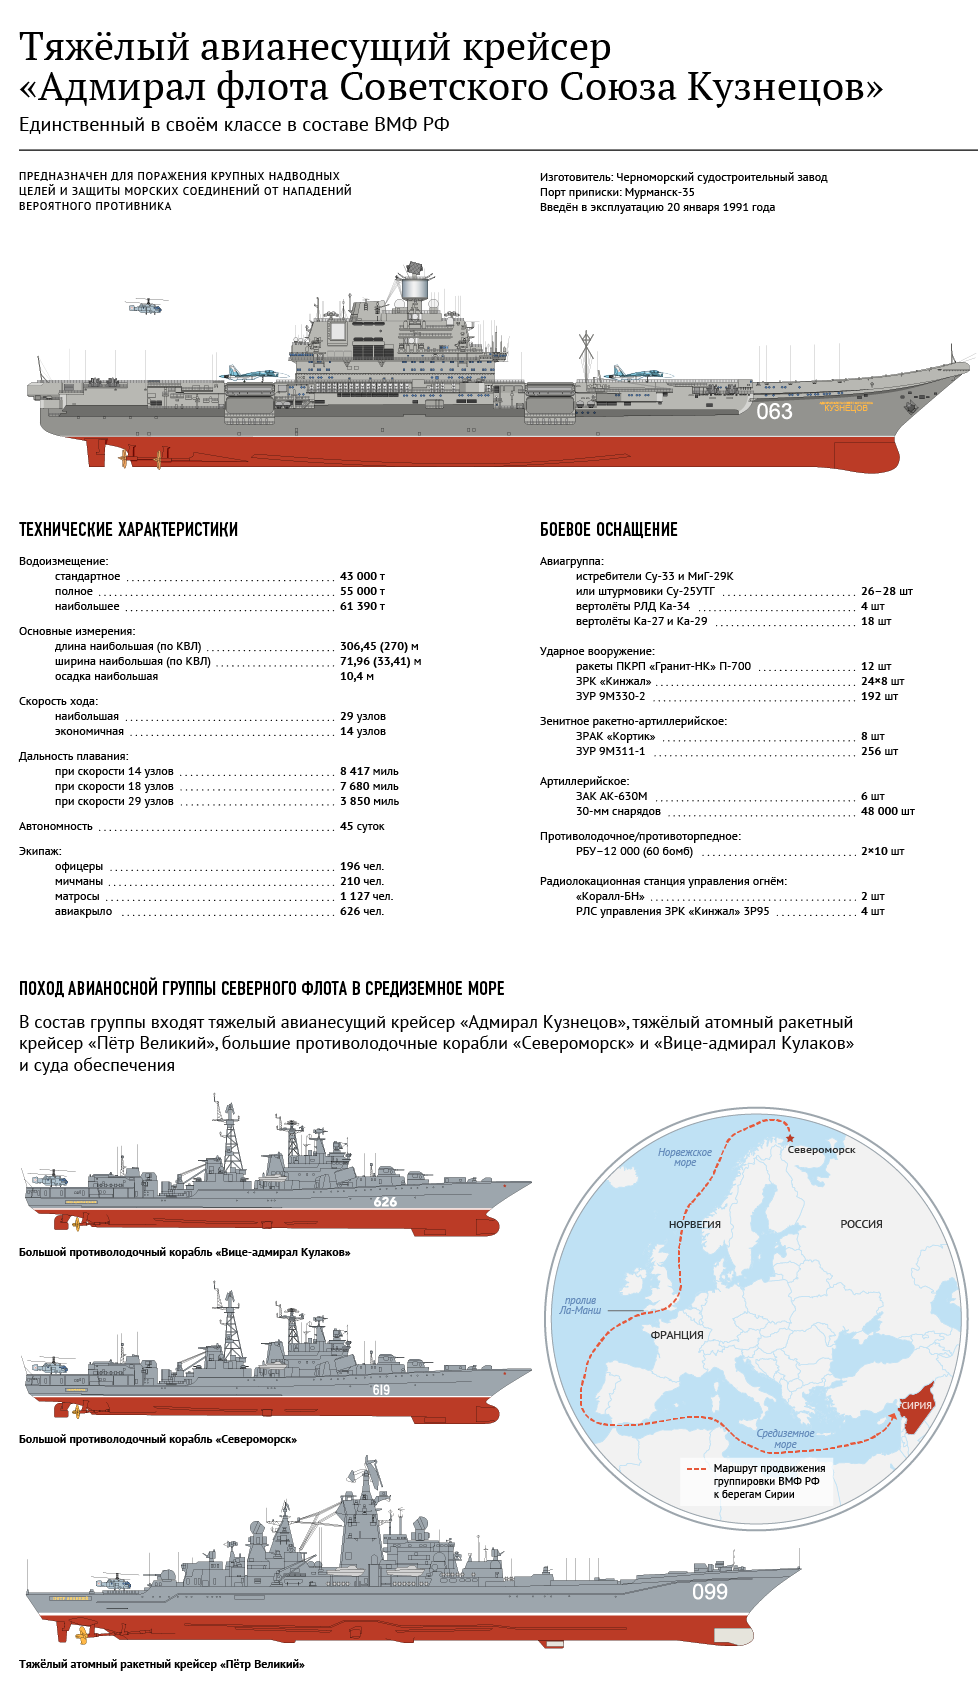 Characteristics of Admiral Kuznetsov and the route to the coast of Syria - Infographics, Politics, War in Syria, Navy, Aircraft carrier Kuznetsov